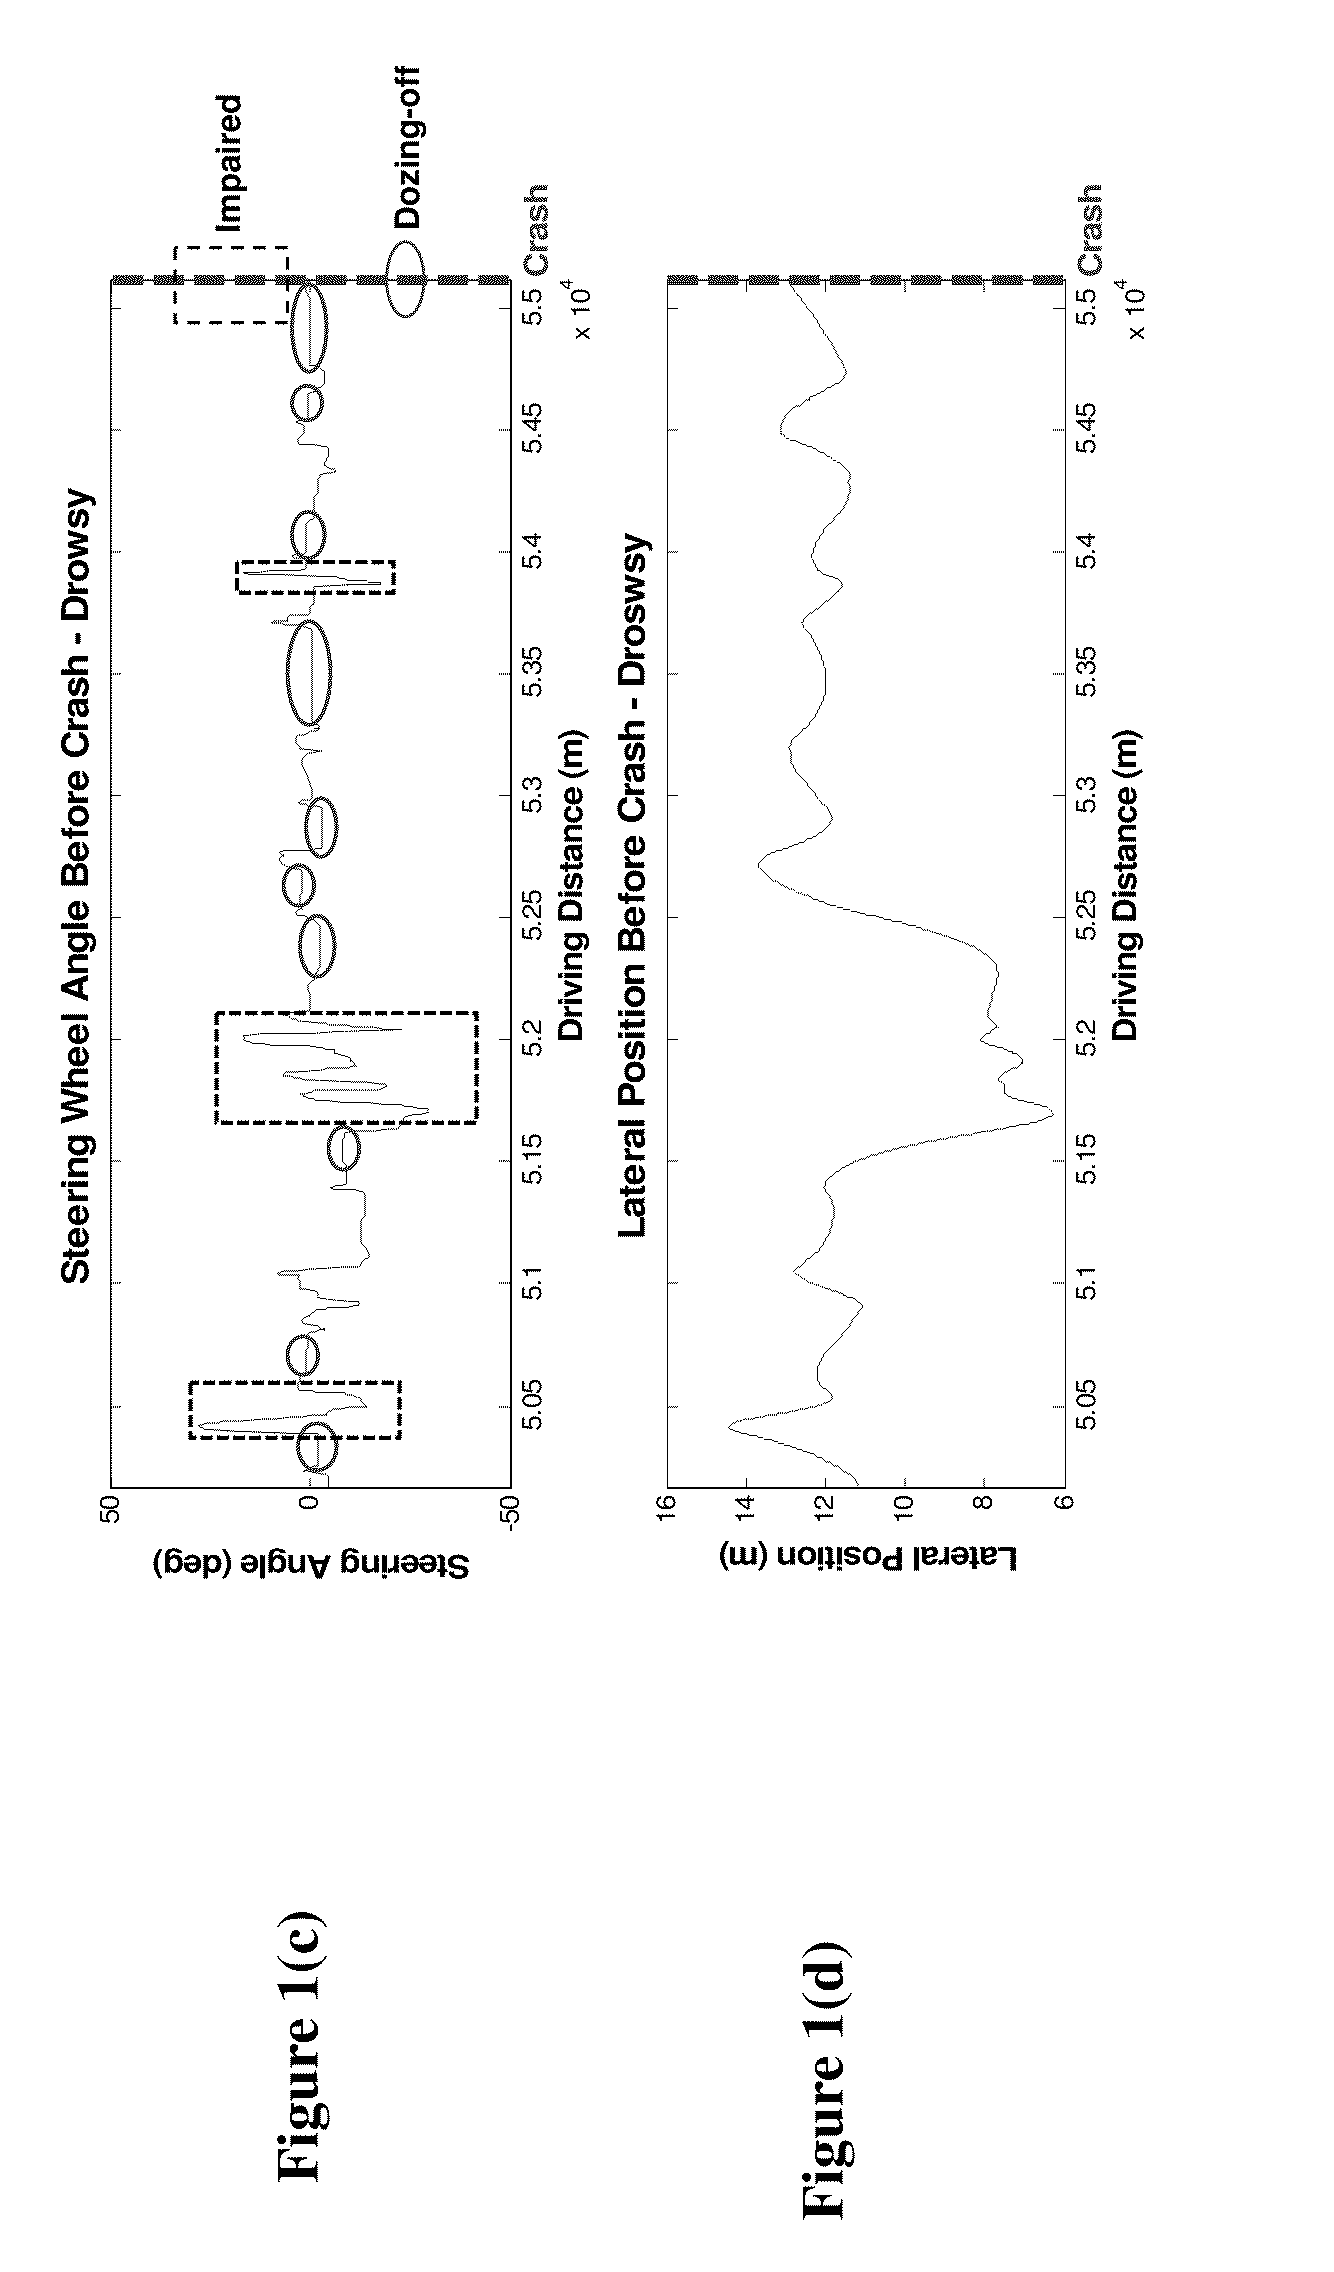 Unobtrusive driver drowsiness detection system and method